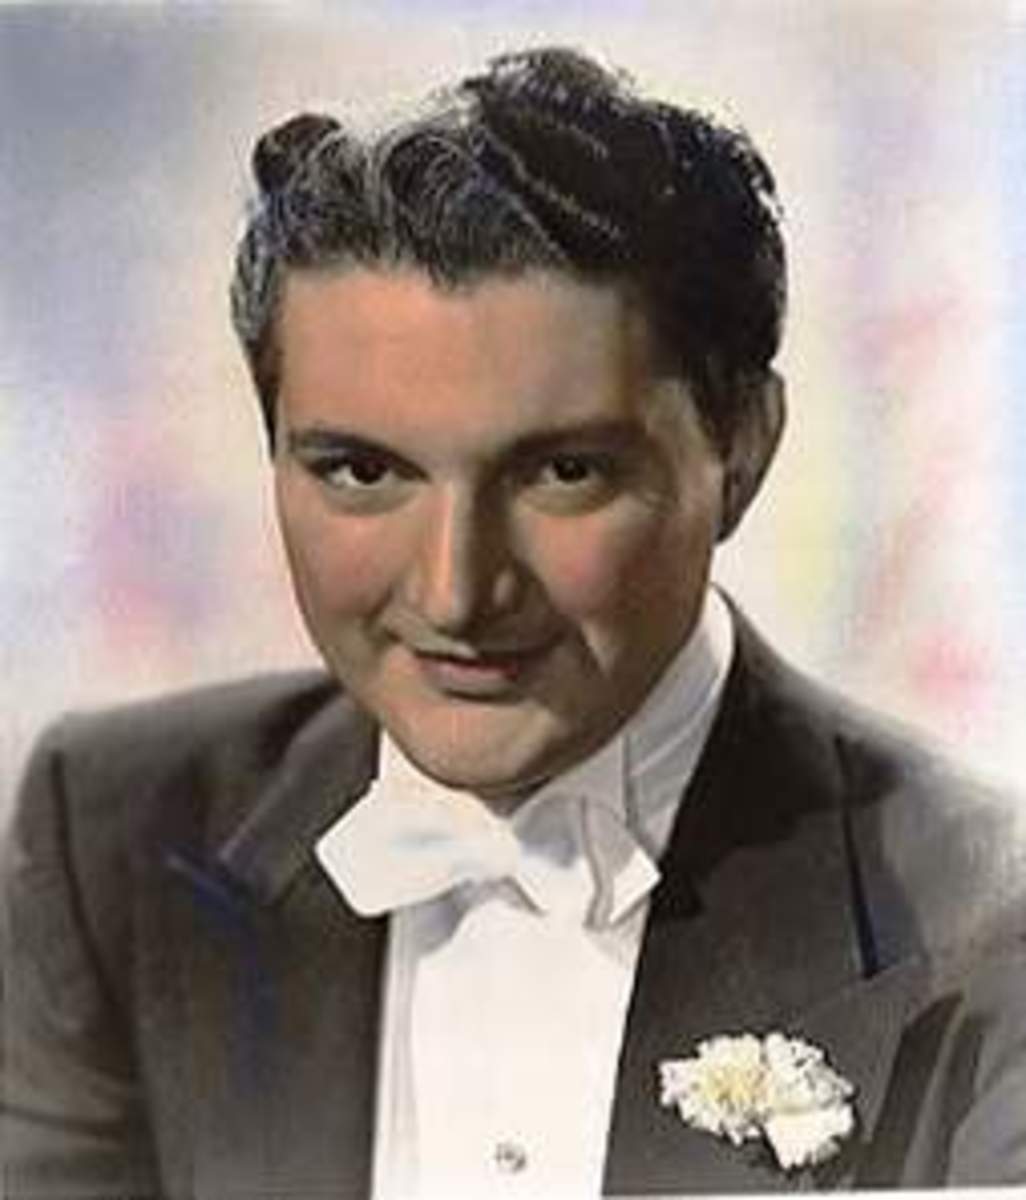 Liberace had a cherubic face in his youth